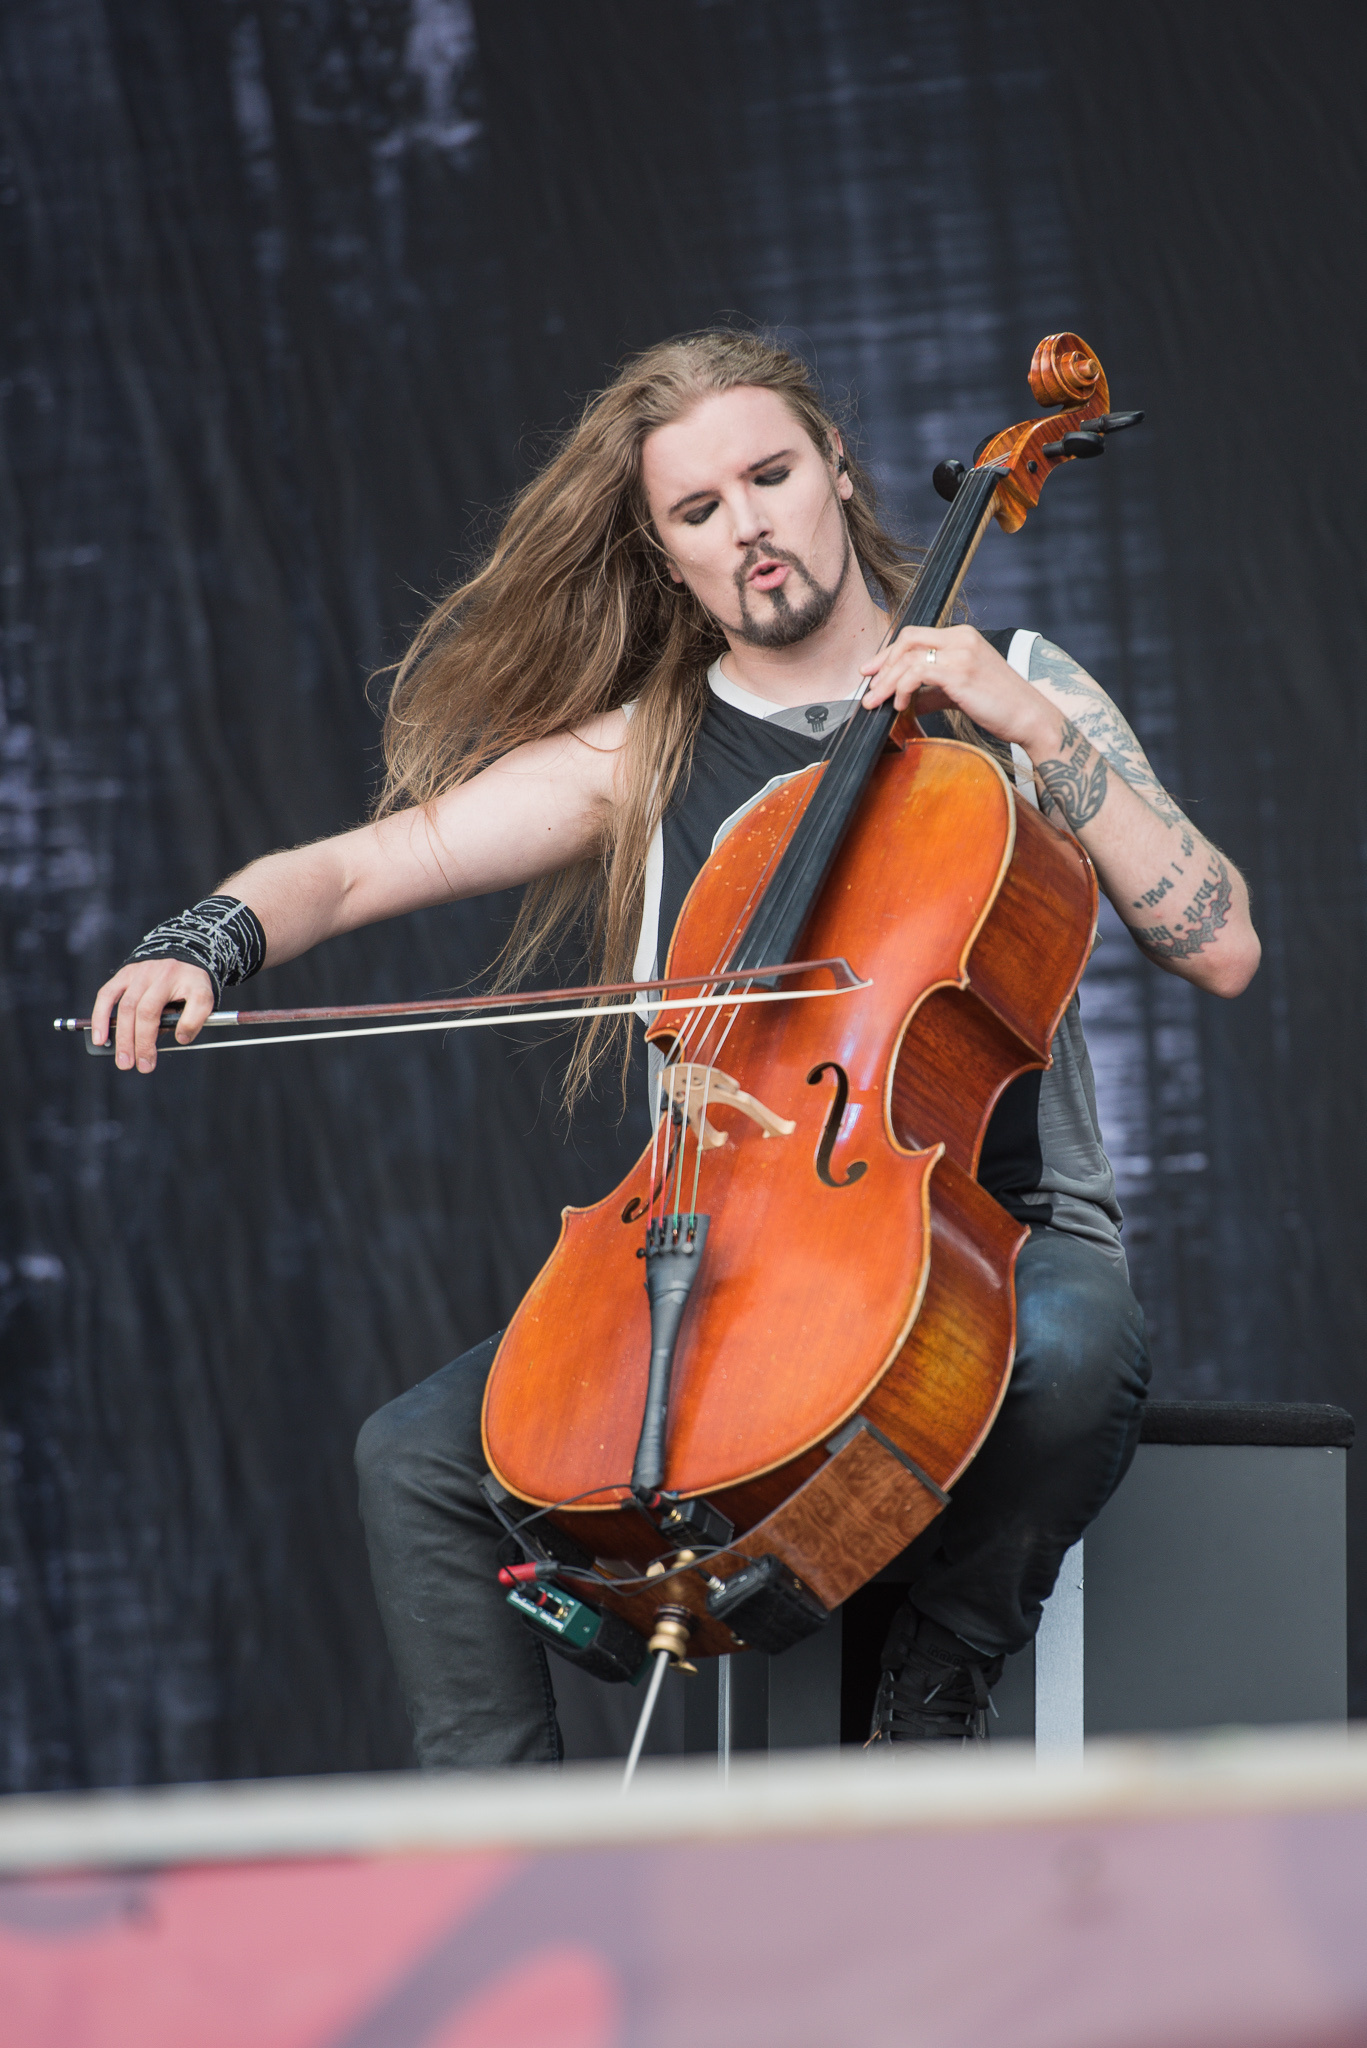 Apocalyptica wallpapers, Music band, 1370x2050 HD Handy